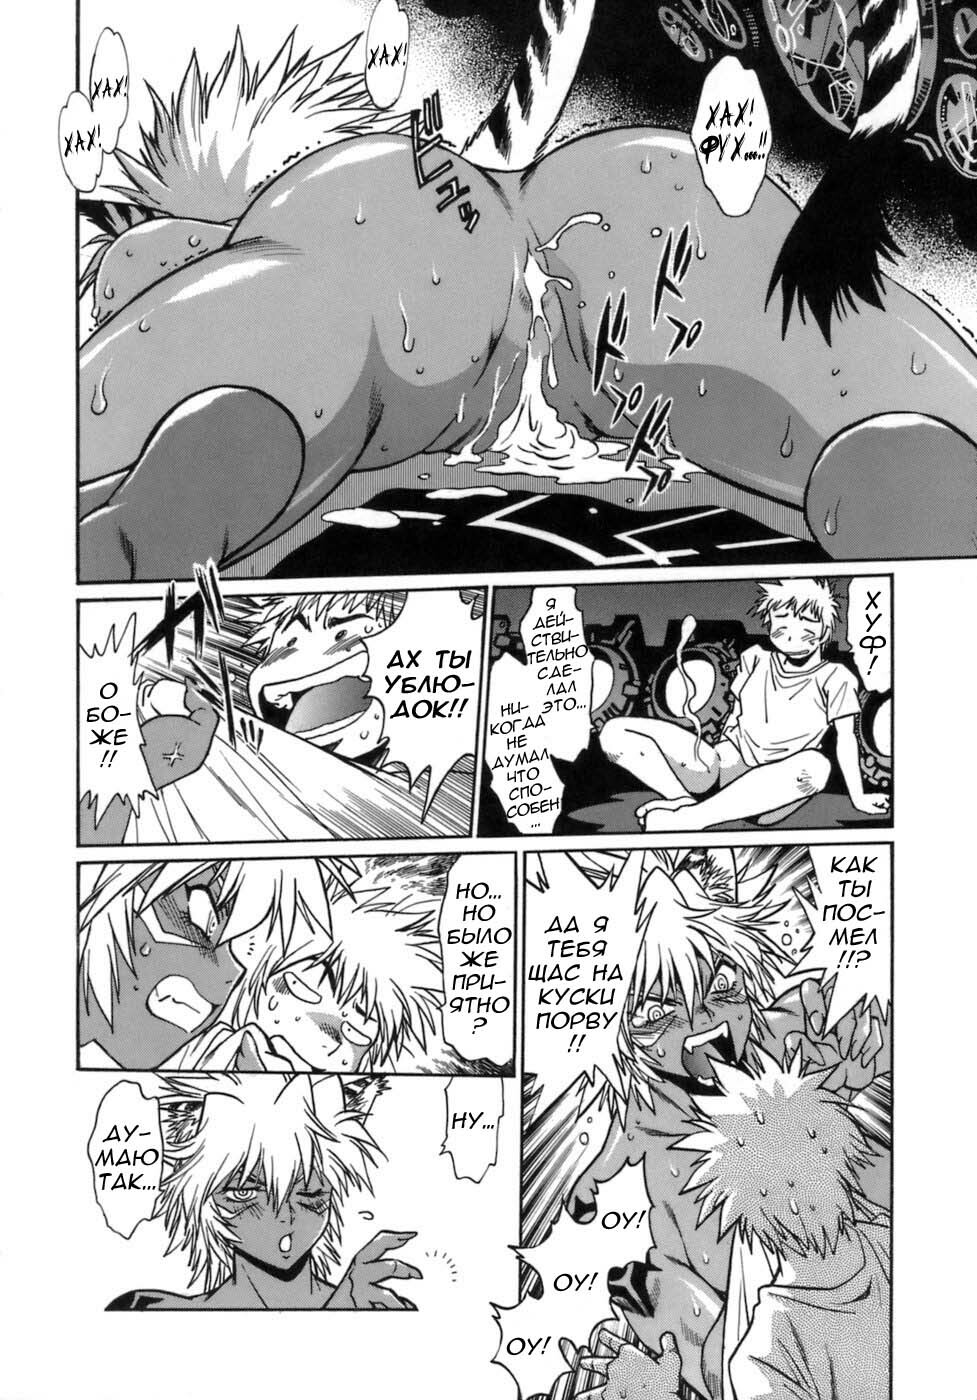 [Manabe Jouji] Tail Chaser 1 Ch. 7 [Russian] page 11 full